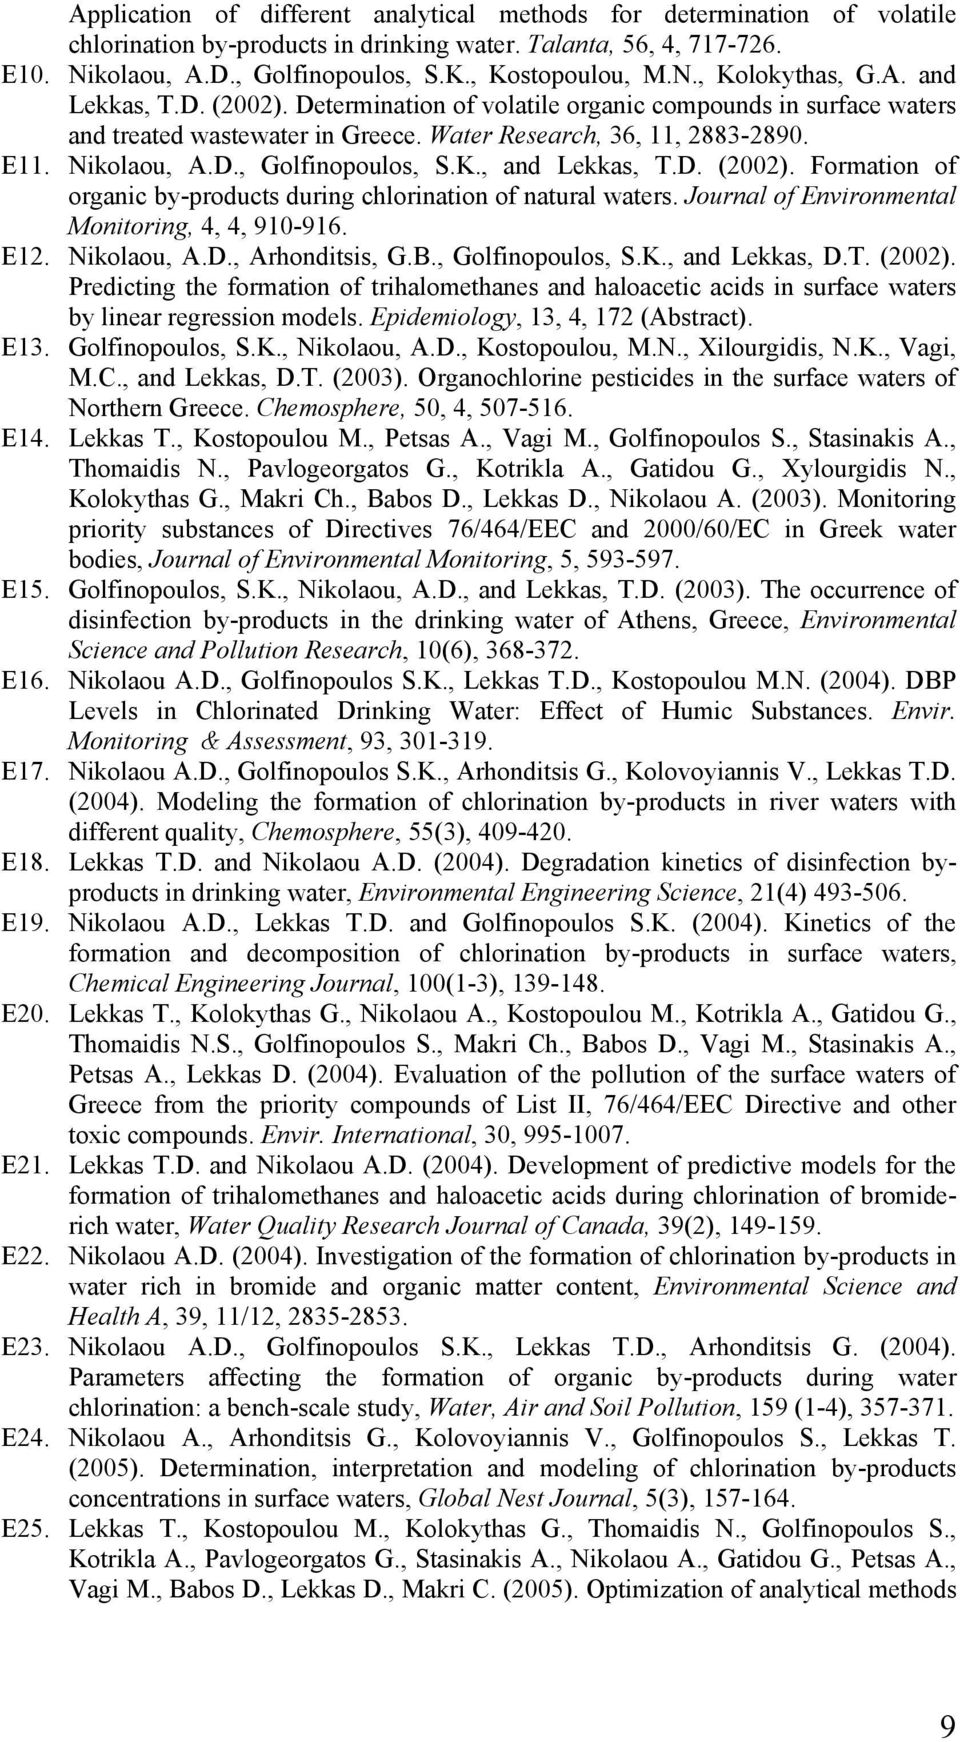 K., and Lekkas, T.D. (2002). Formation of organic by-products during chlorination of natural waters. Journal of Environmental Monitoring, 4, 4, 910-916. E12. Νikolaou, A.D., Arhonditsis, G.B.